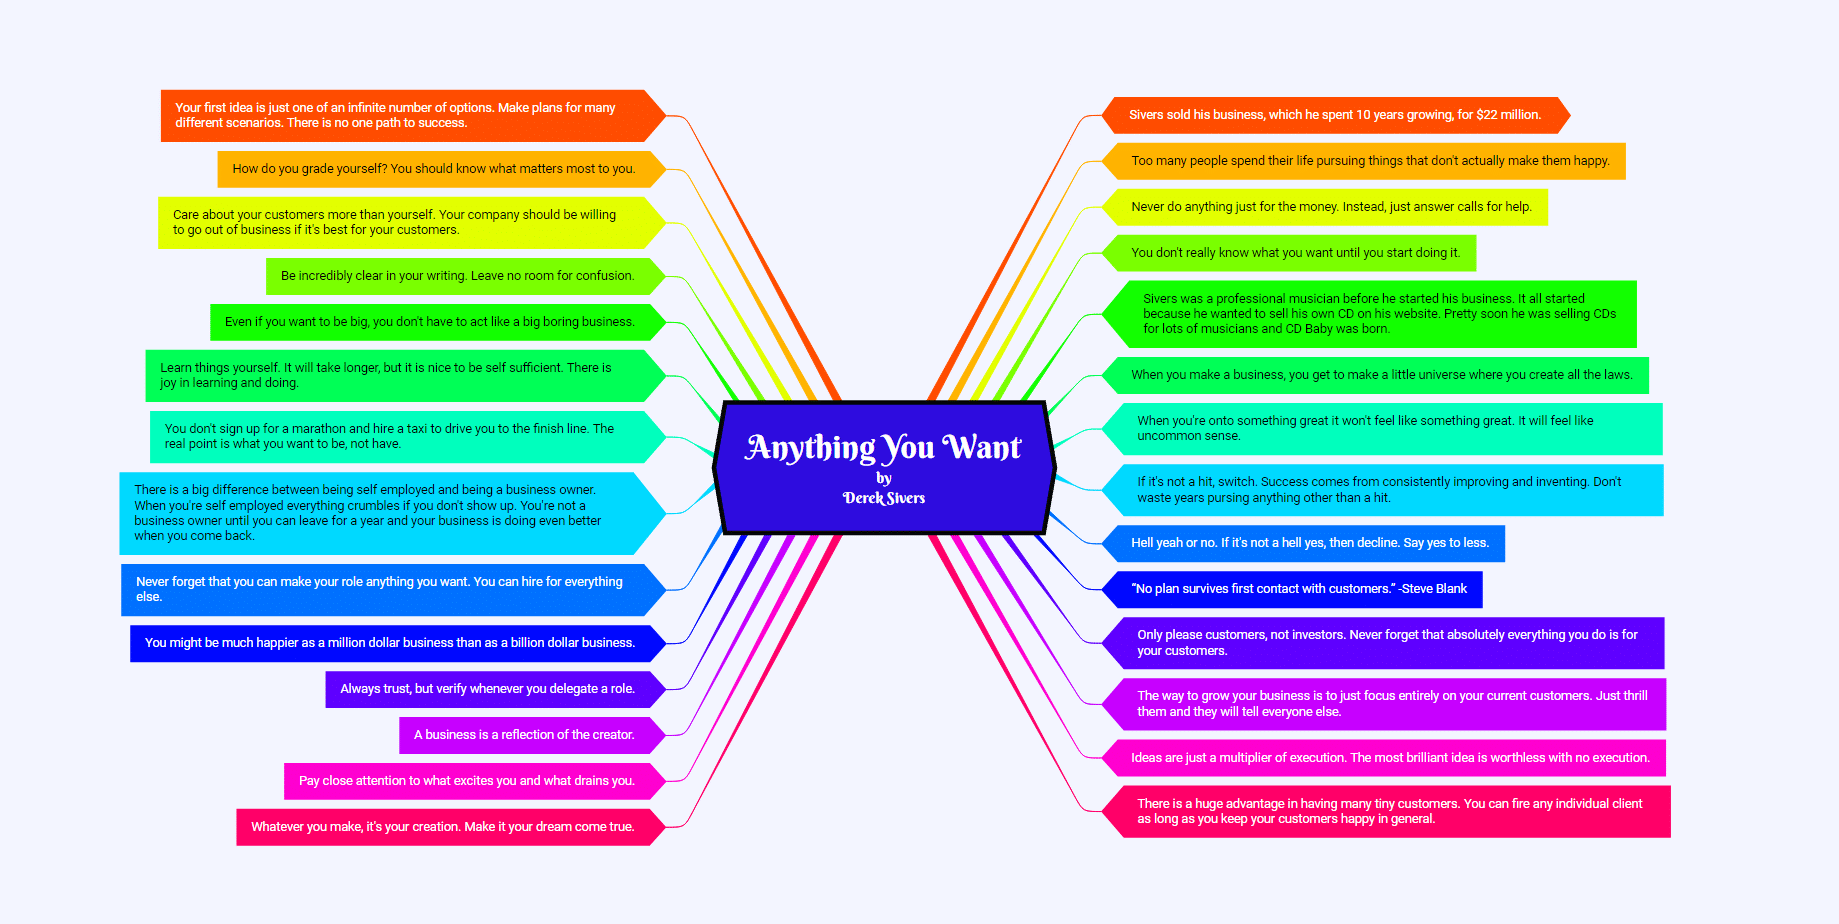 Anything you want by Derek Sivers